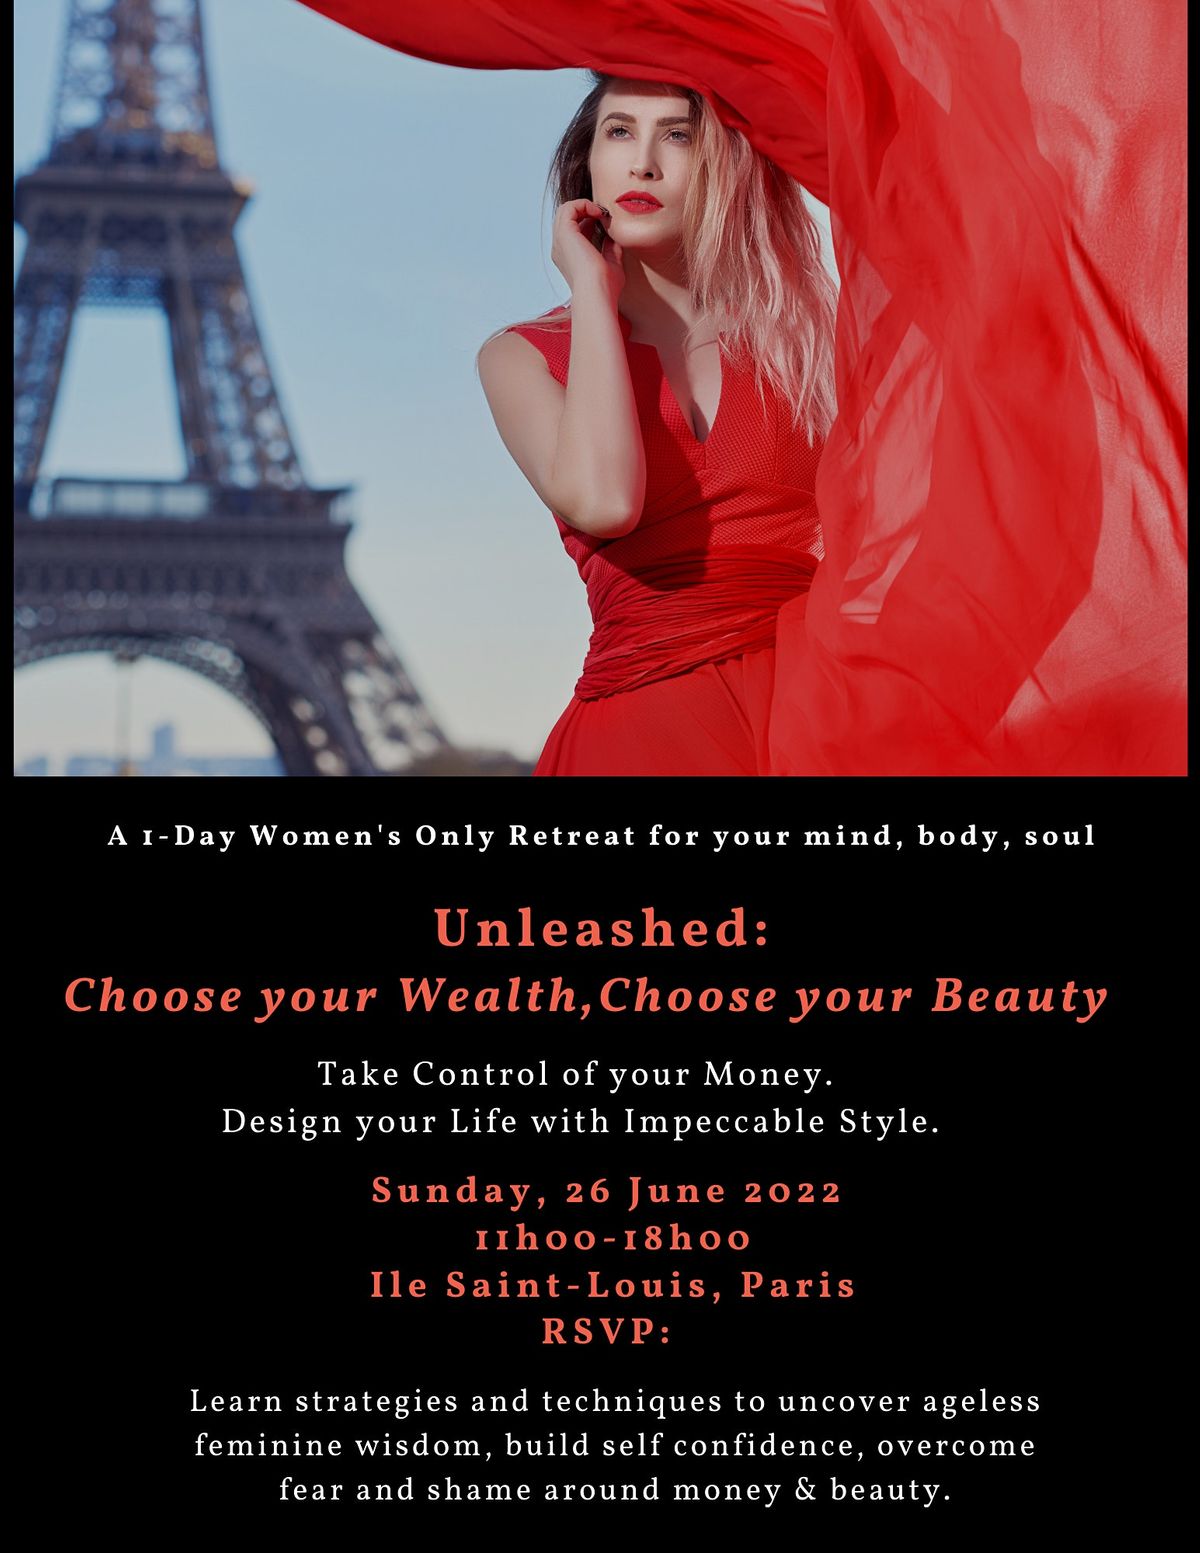 Unleashed: Choose your Wealth, Choose your Beauty